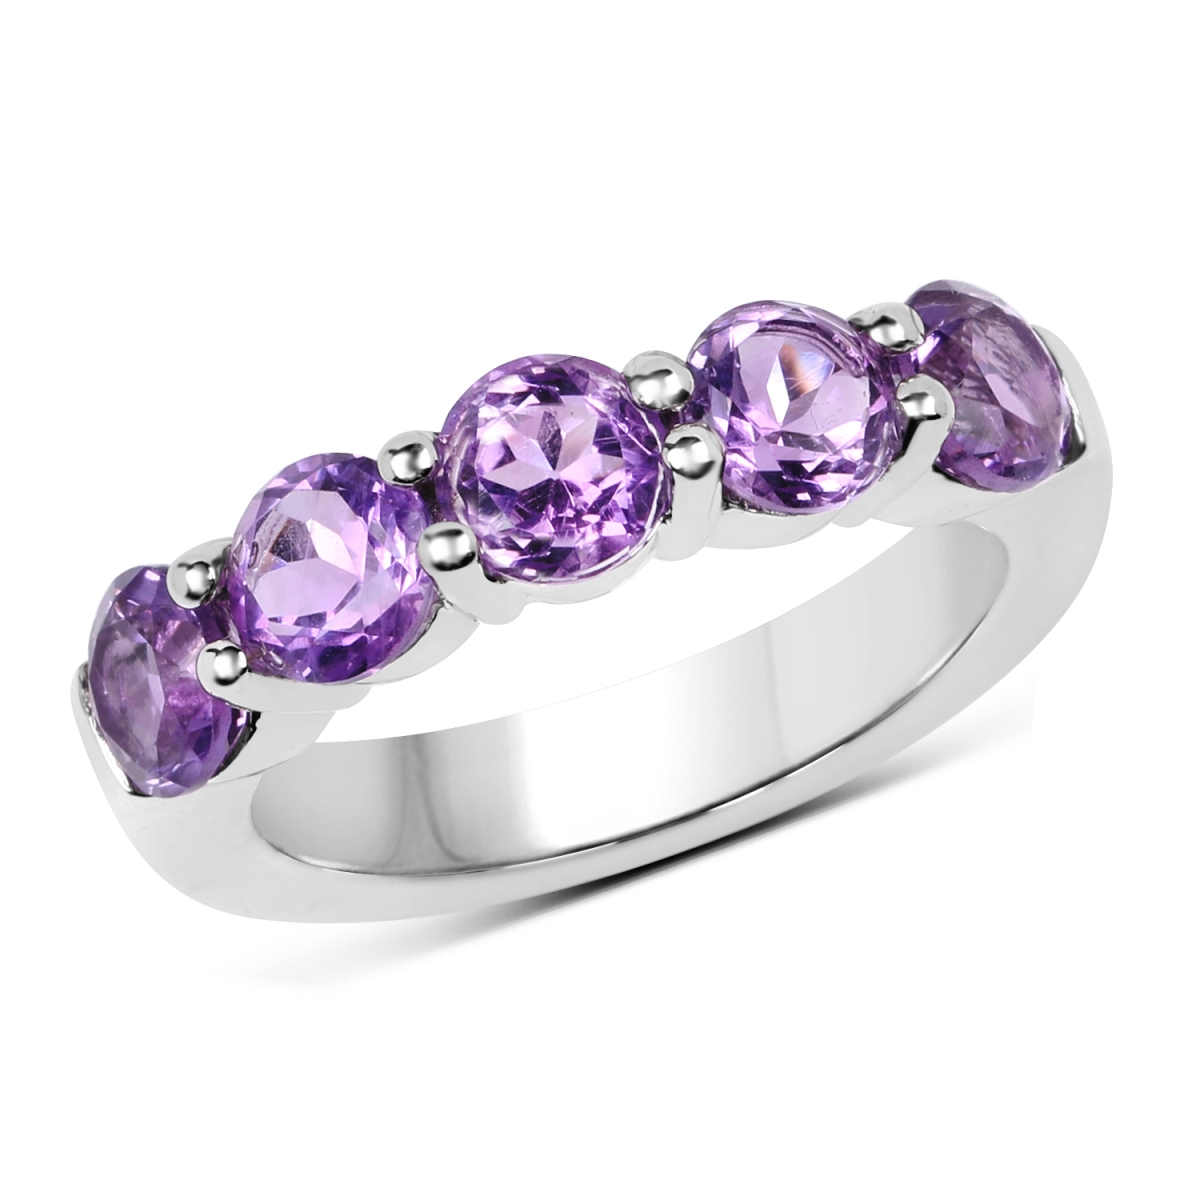 Picture of Malaika QR19146A-SSR-9 2.25 Carat Genuine Amethyst 0.925 Sterling Silver Ring